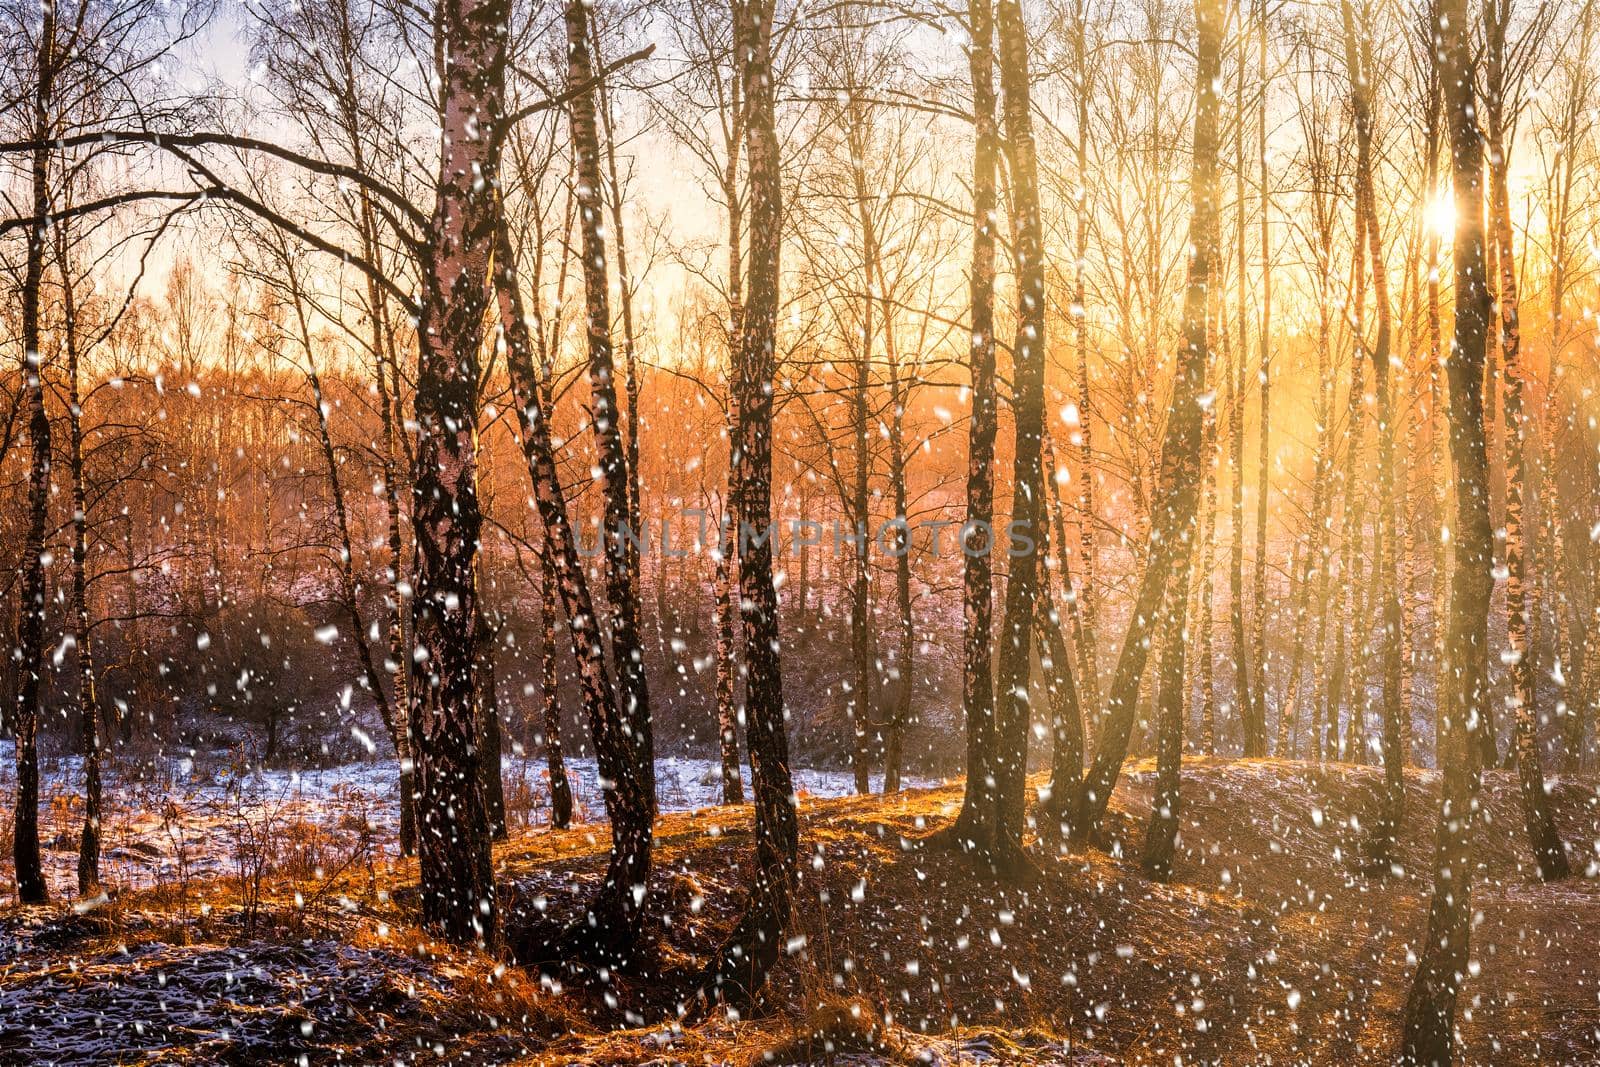 Sunset or sunrise in a birch grove with a falling snow. Rows of birch trunks with the sun's rays passing through them. Snowfall.